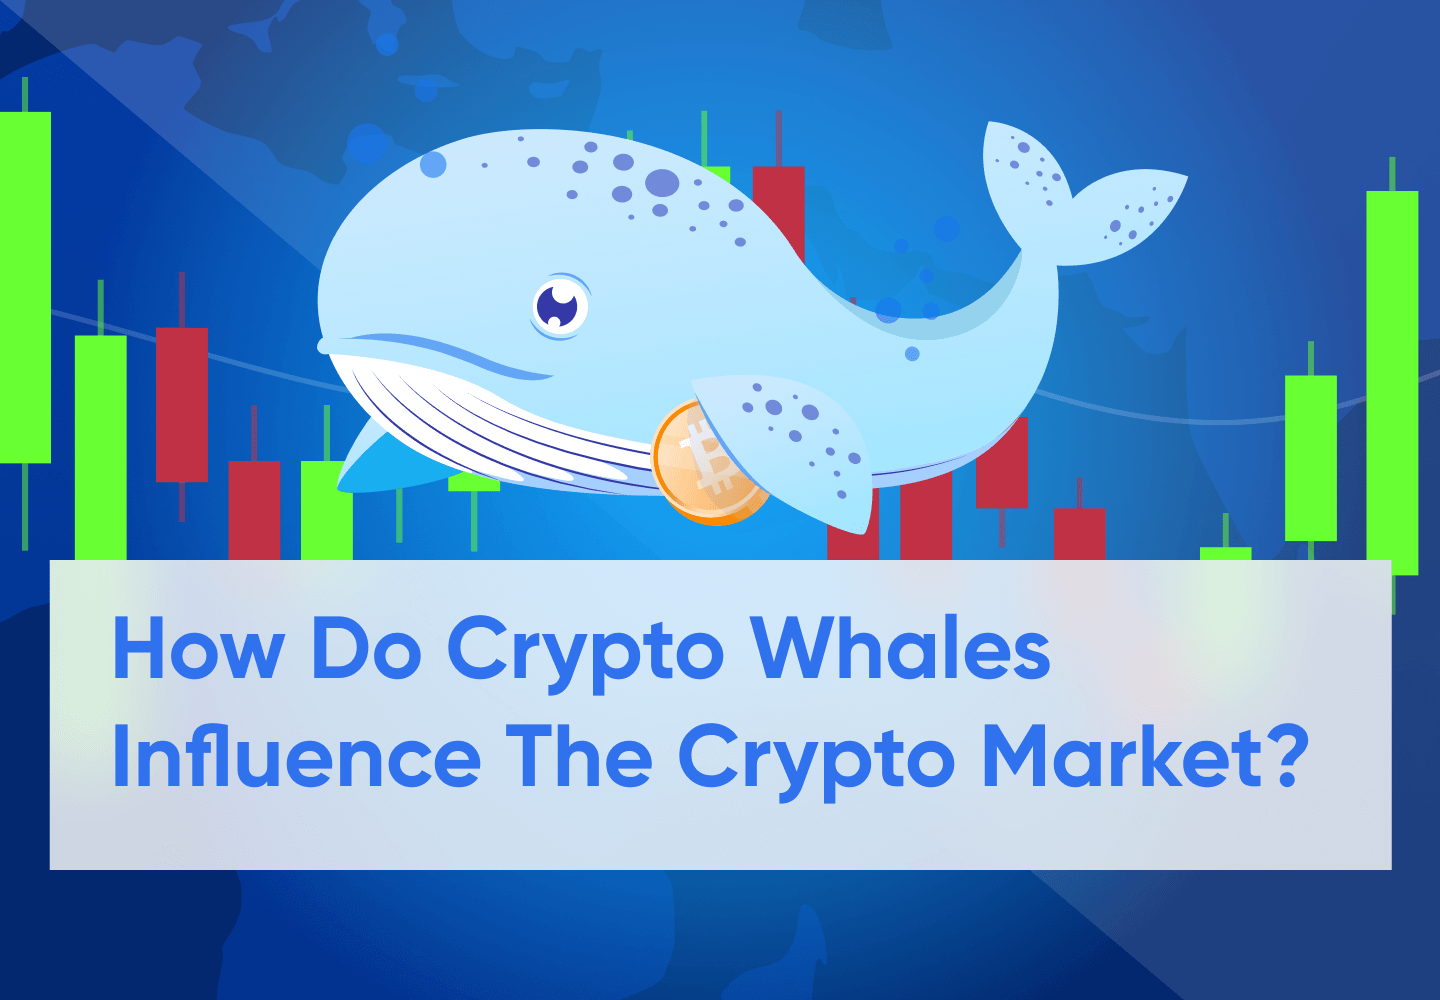 What Are Crypto Whales and Why Do They Matter?